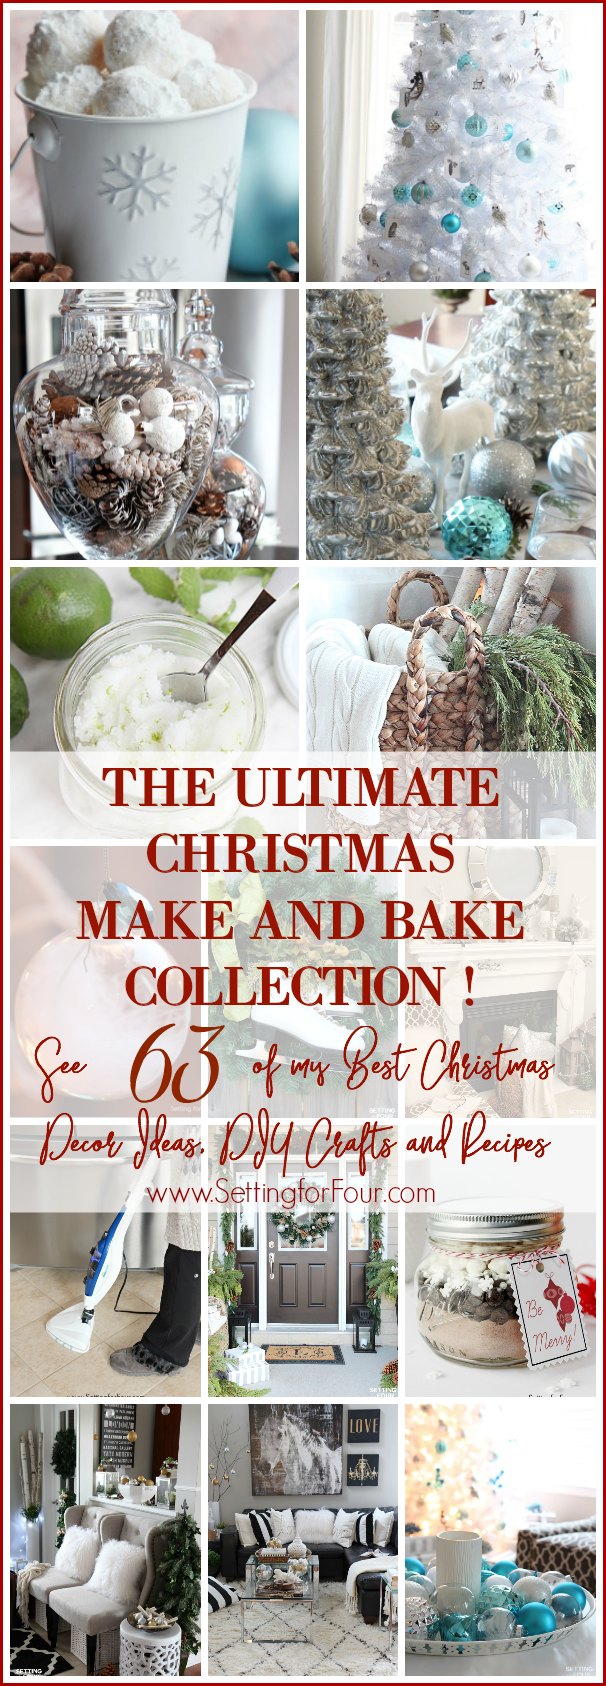 See 63 of my Best Christmas Decor Ideas, DIY Crafts and Recipes from the past 5 years in this Ultimate Christmas Make and Bake Collection! These are the most popular holiday treats, DIY projects, holiday cleaning tips and Christmas decor ideas on my website to date! I hope this collection gives you lots of inspiration to make your home pretty and sparkling clean for the holidays and make some fun and beautiful gifts for your family! 